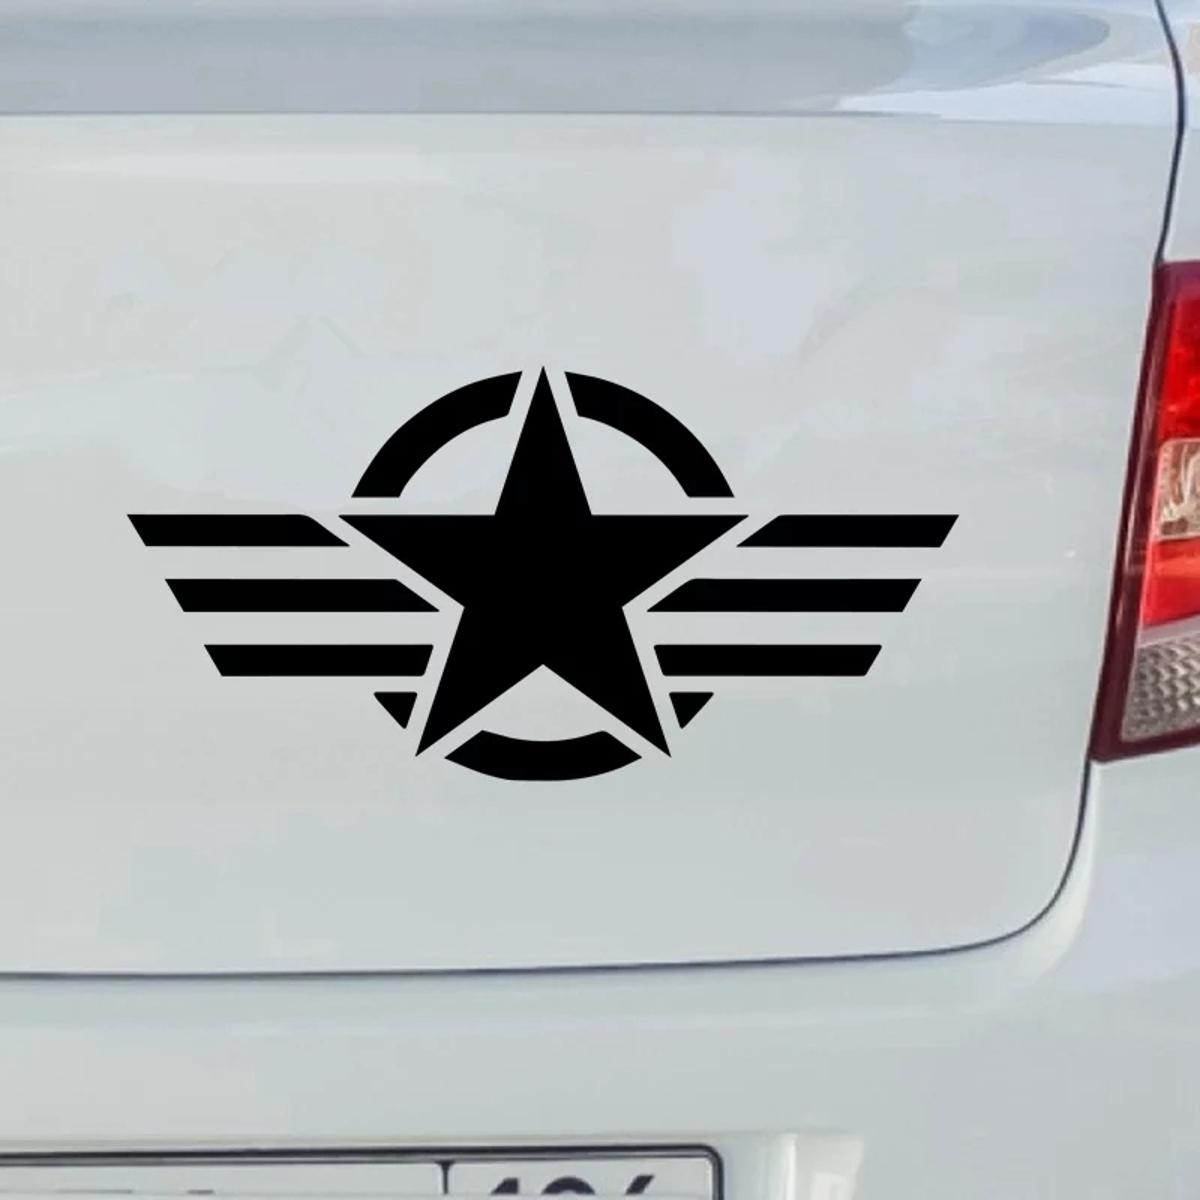 Military Star Car Sticker (Black)5X10 Inches, Auto Vinyl Diy Decal  Automobile Sport Styling Decoration Car Tuning Accessories, Auto Decoration